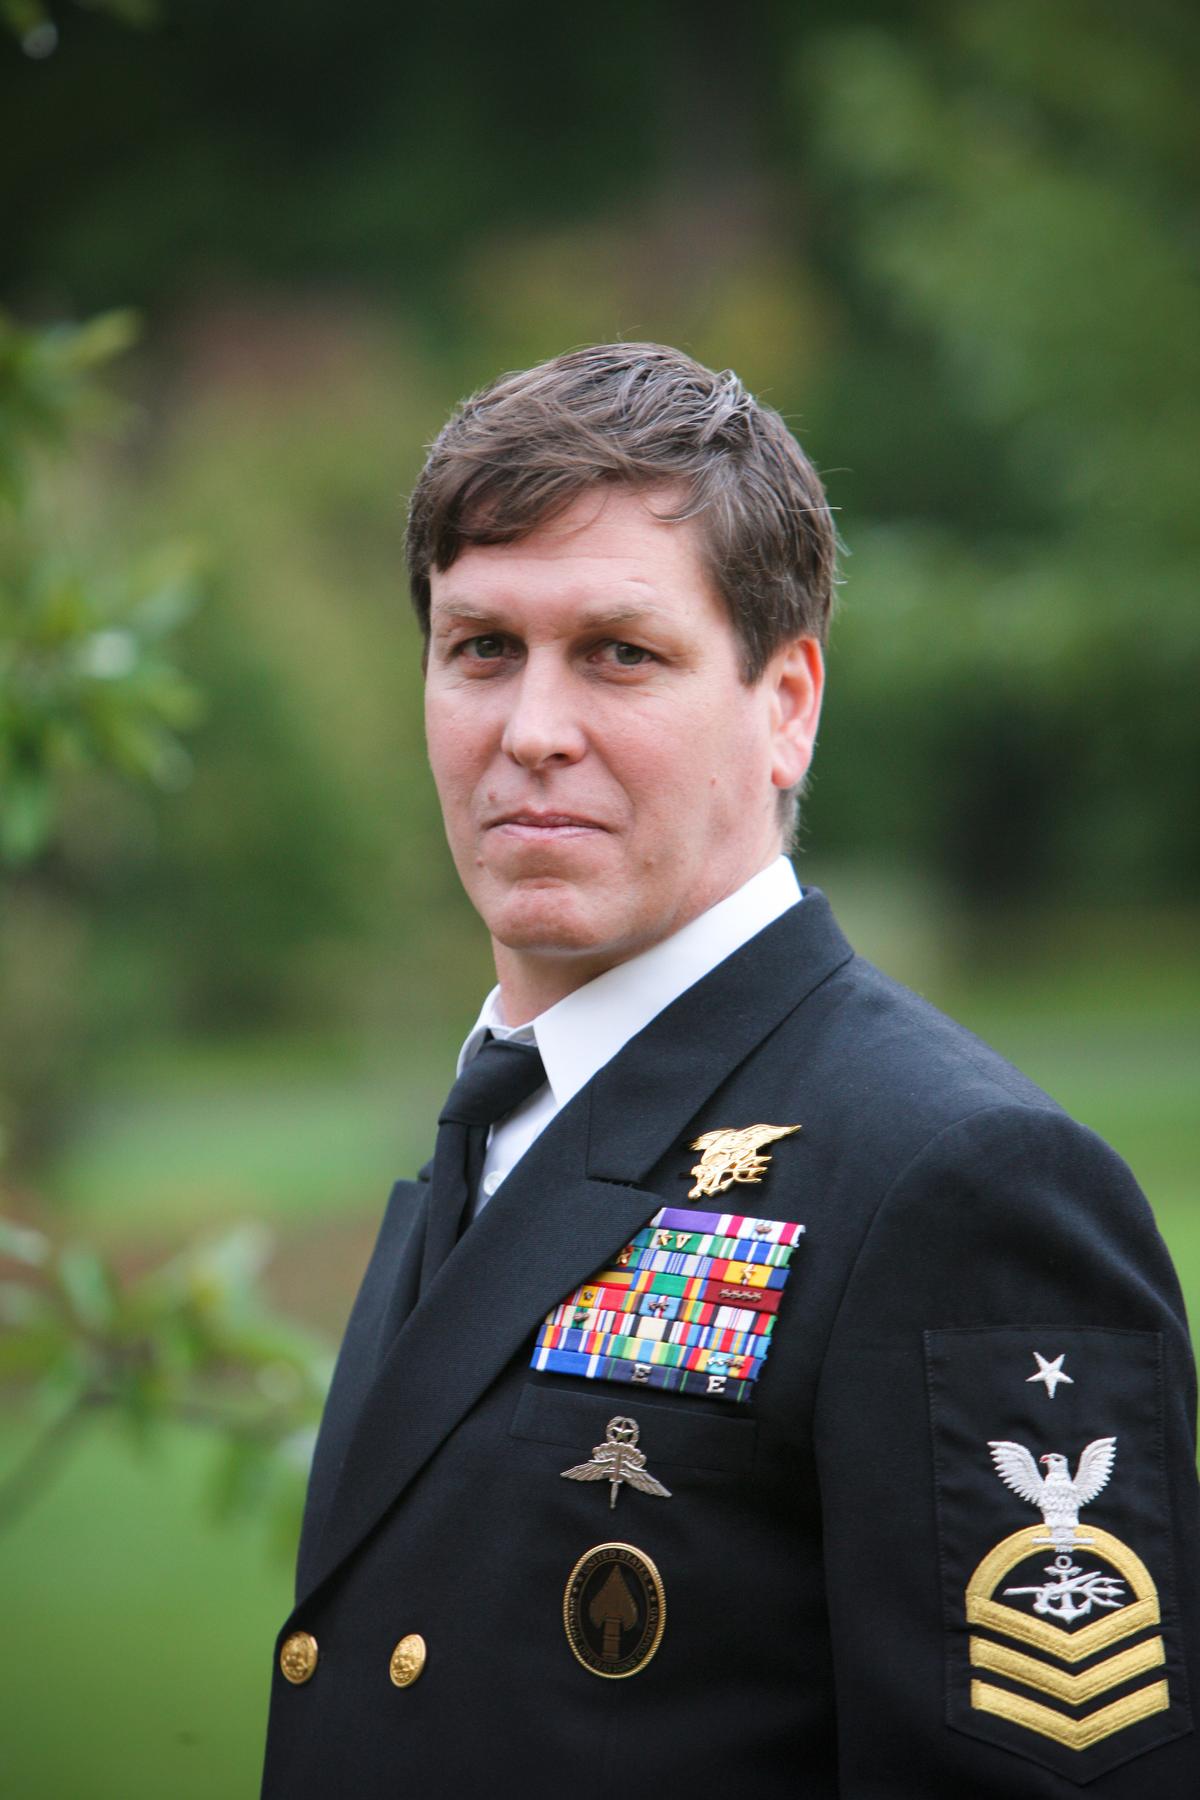 A recent photo of Chris Beck in Navy uniform. (Sandi Foraci photography/CC BY 3.0)